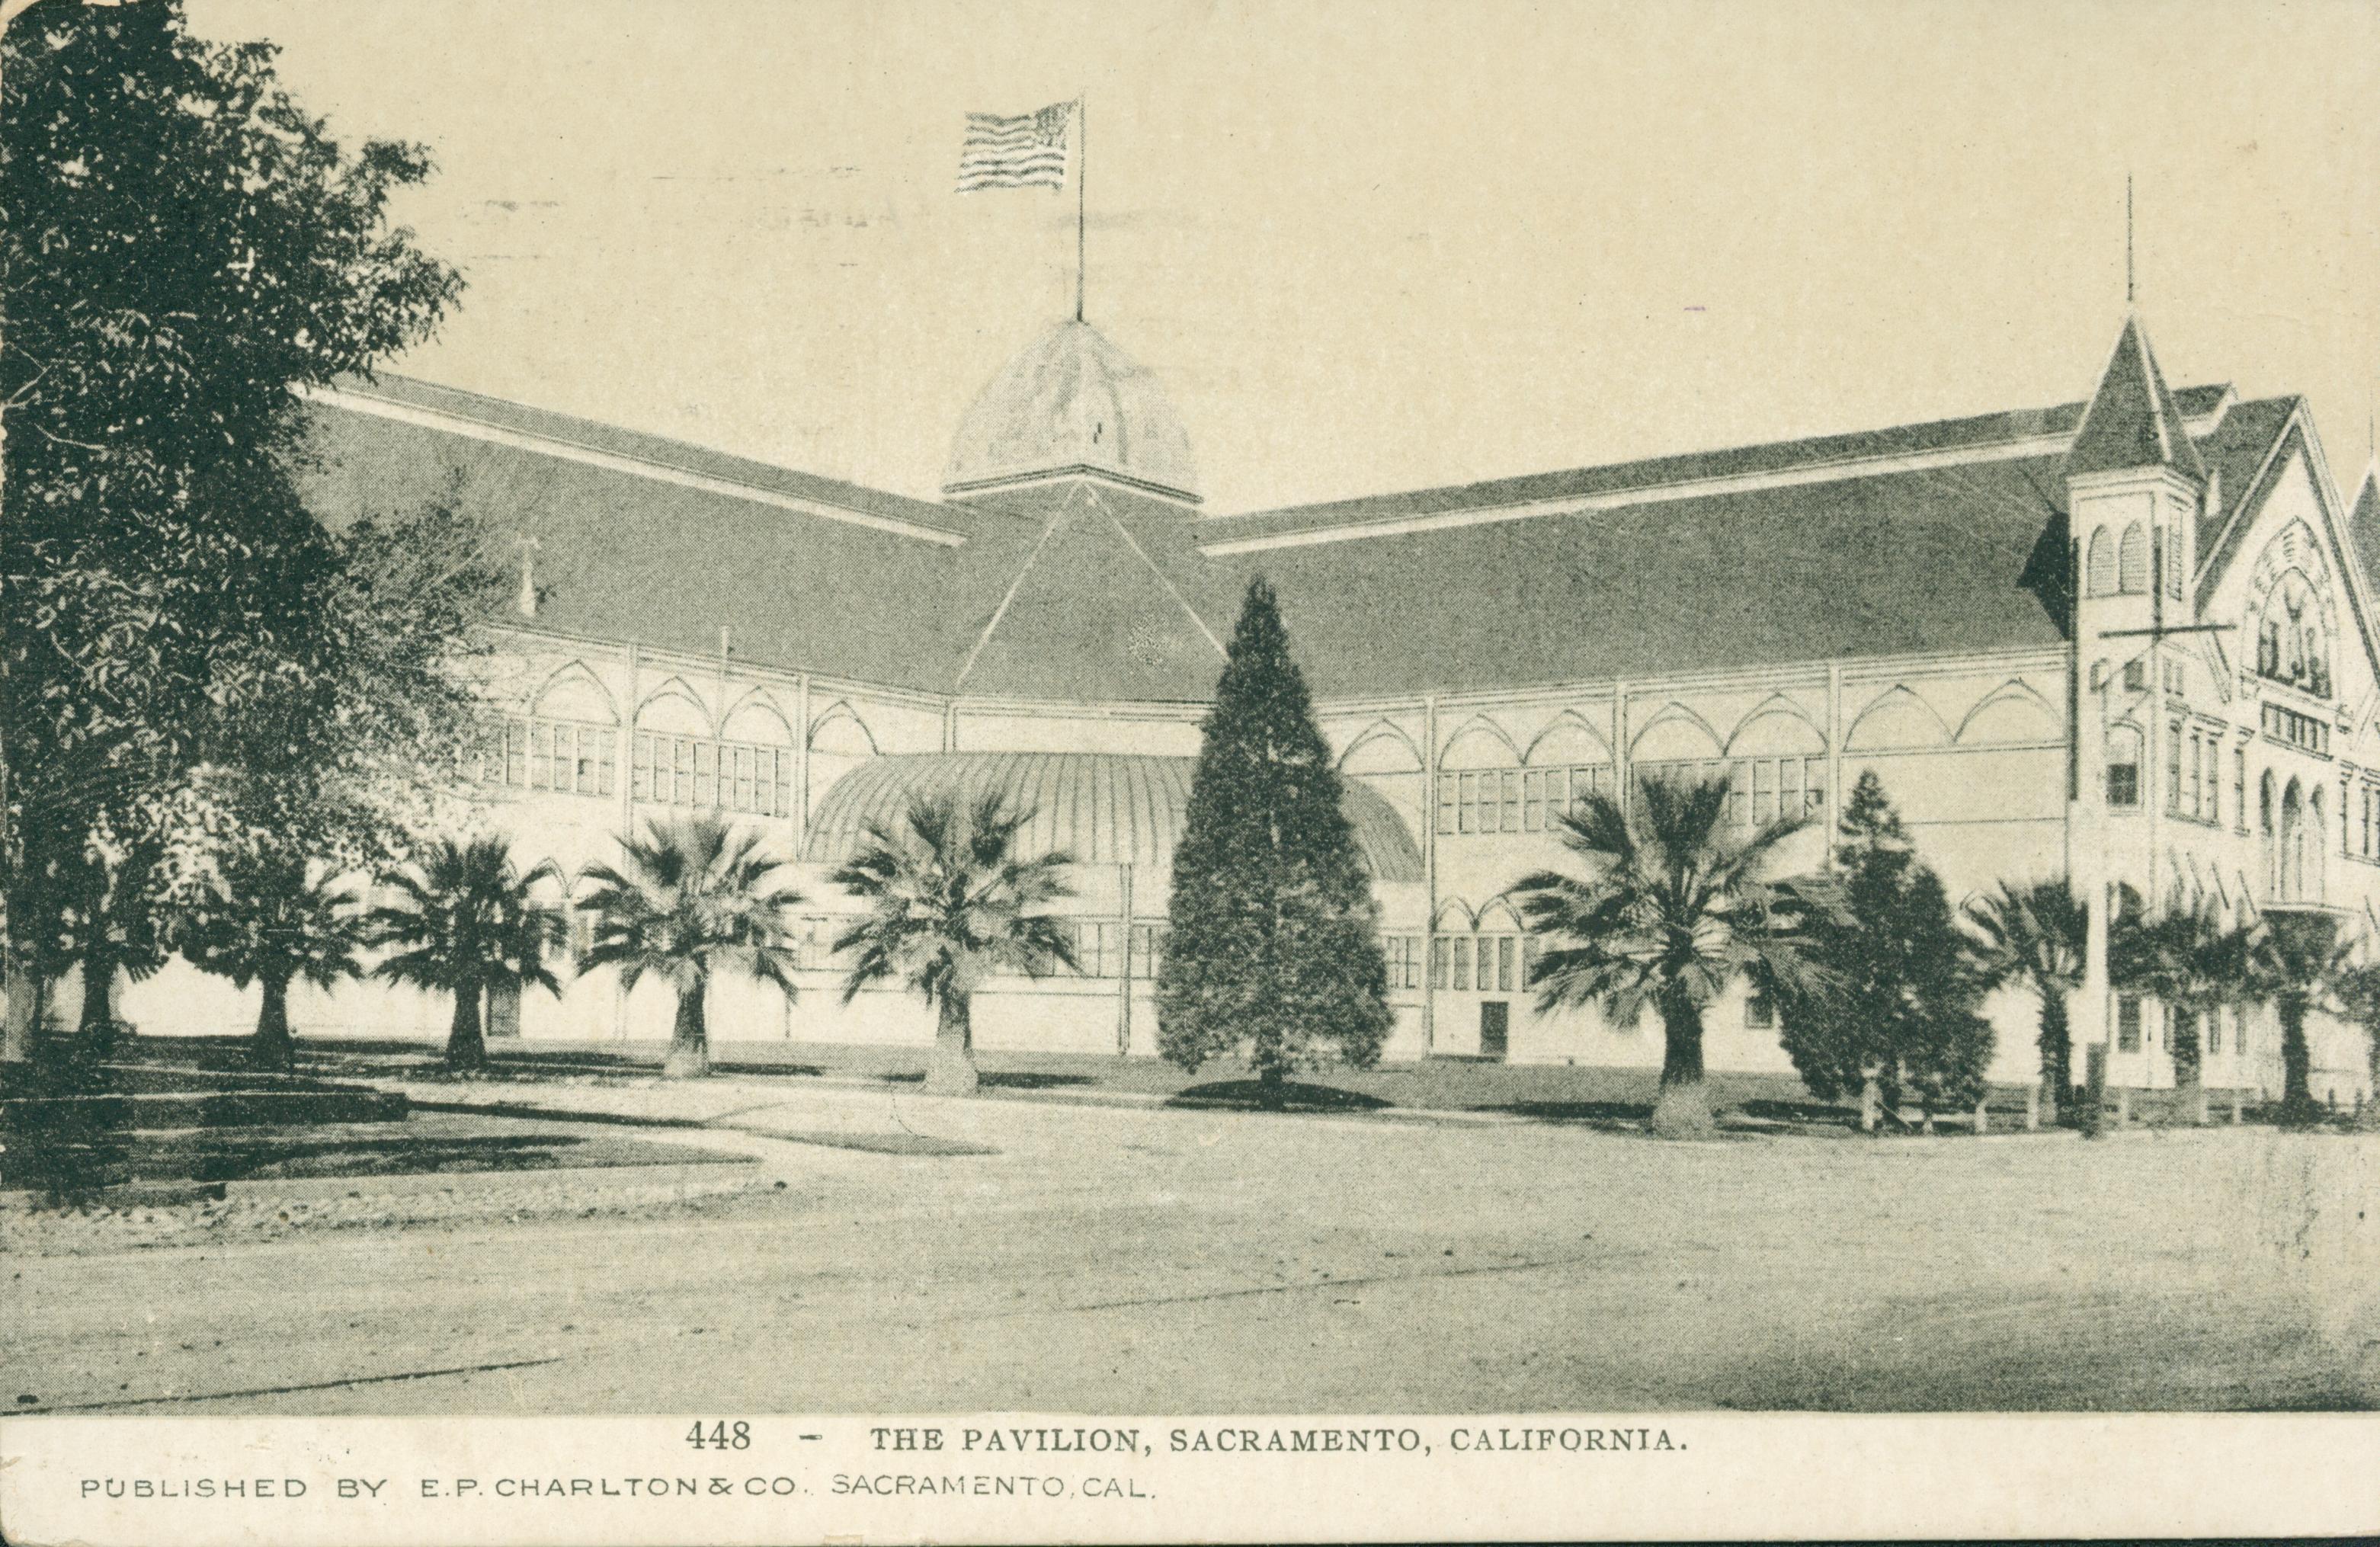 This postcard shows a corner view of the State Agricultural Pavilion